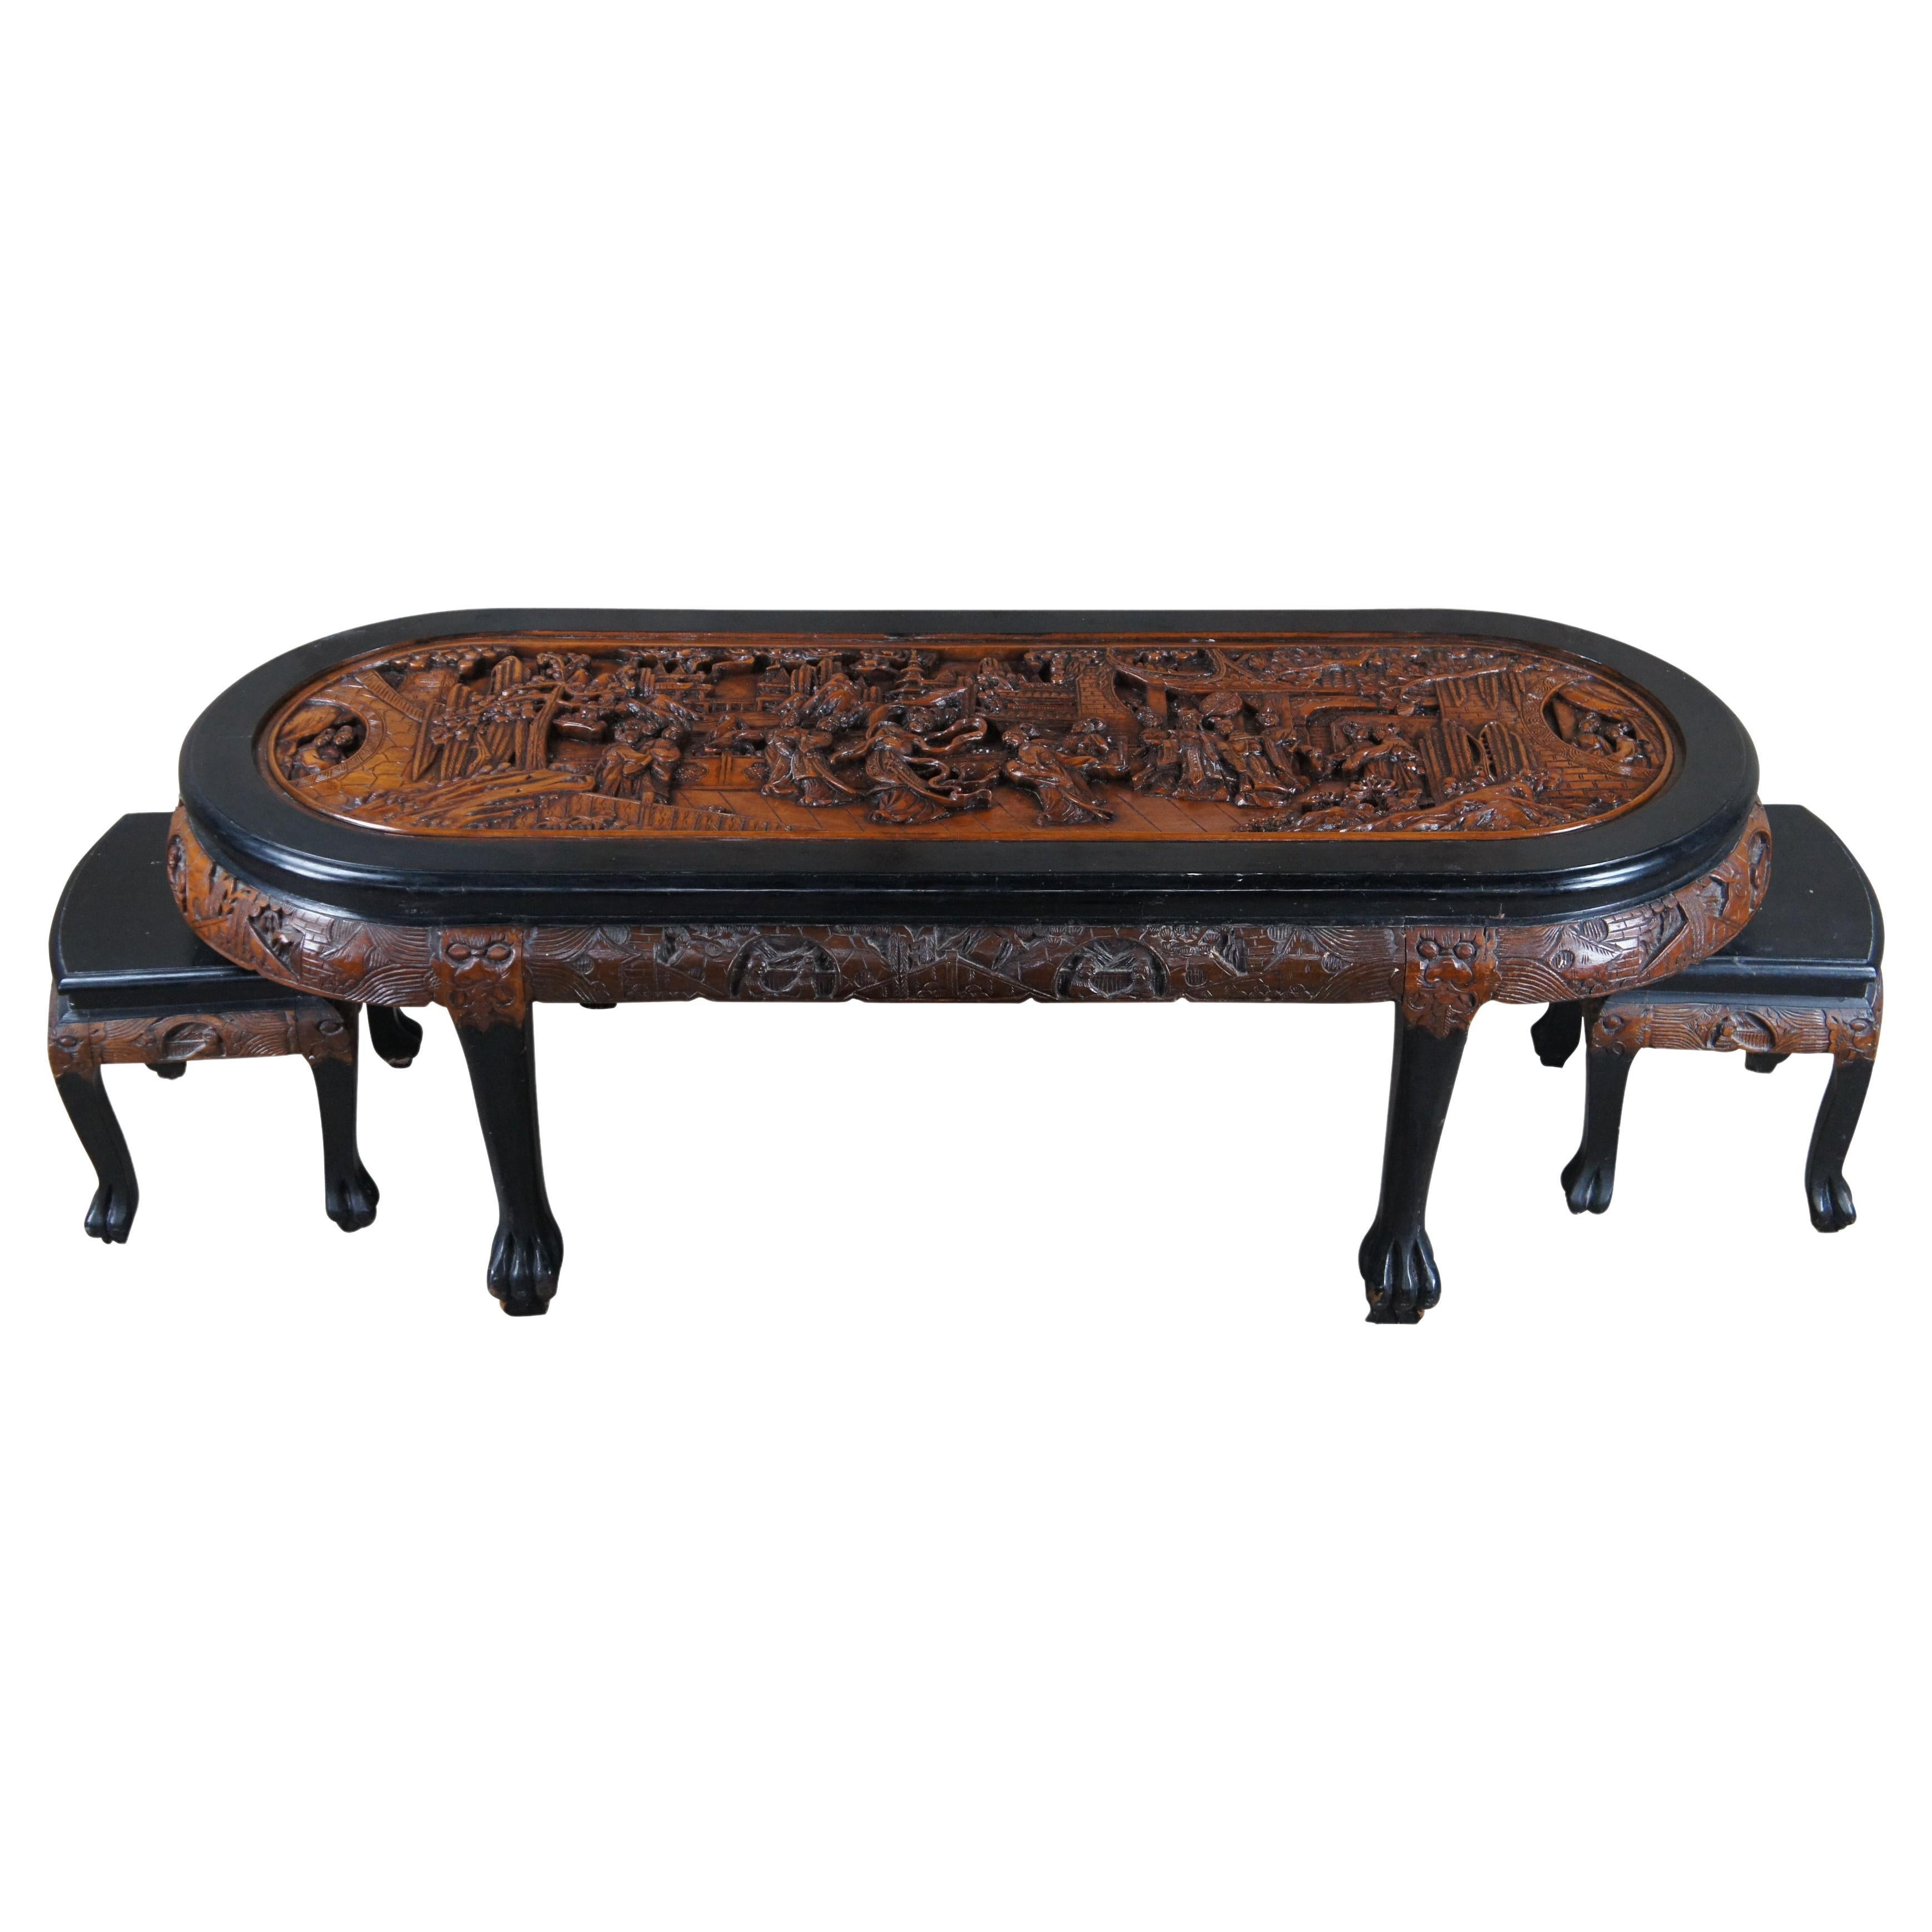 Vintage Chinese Carved Elm Black Lacquer Claw Foot Coffee Table & Stools 62" For Sale